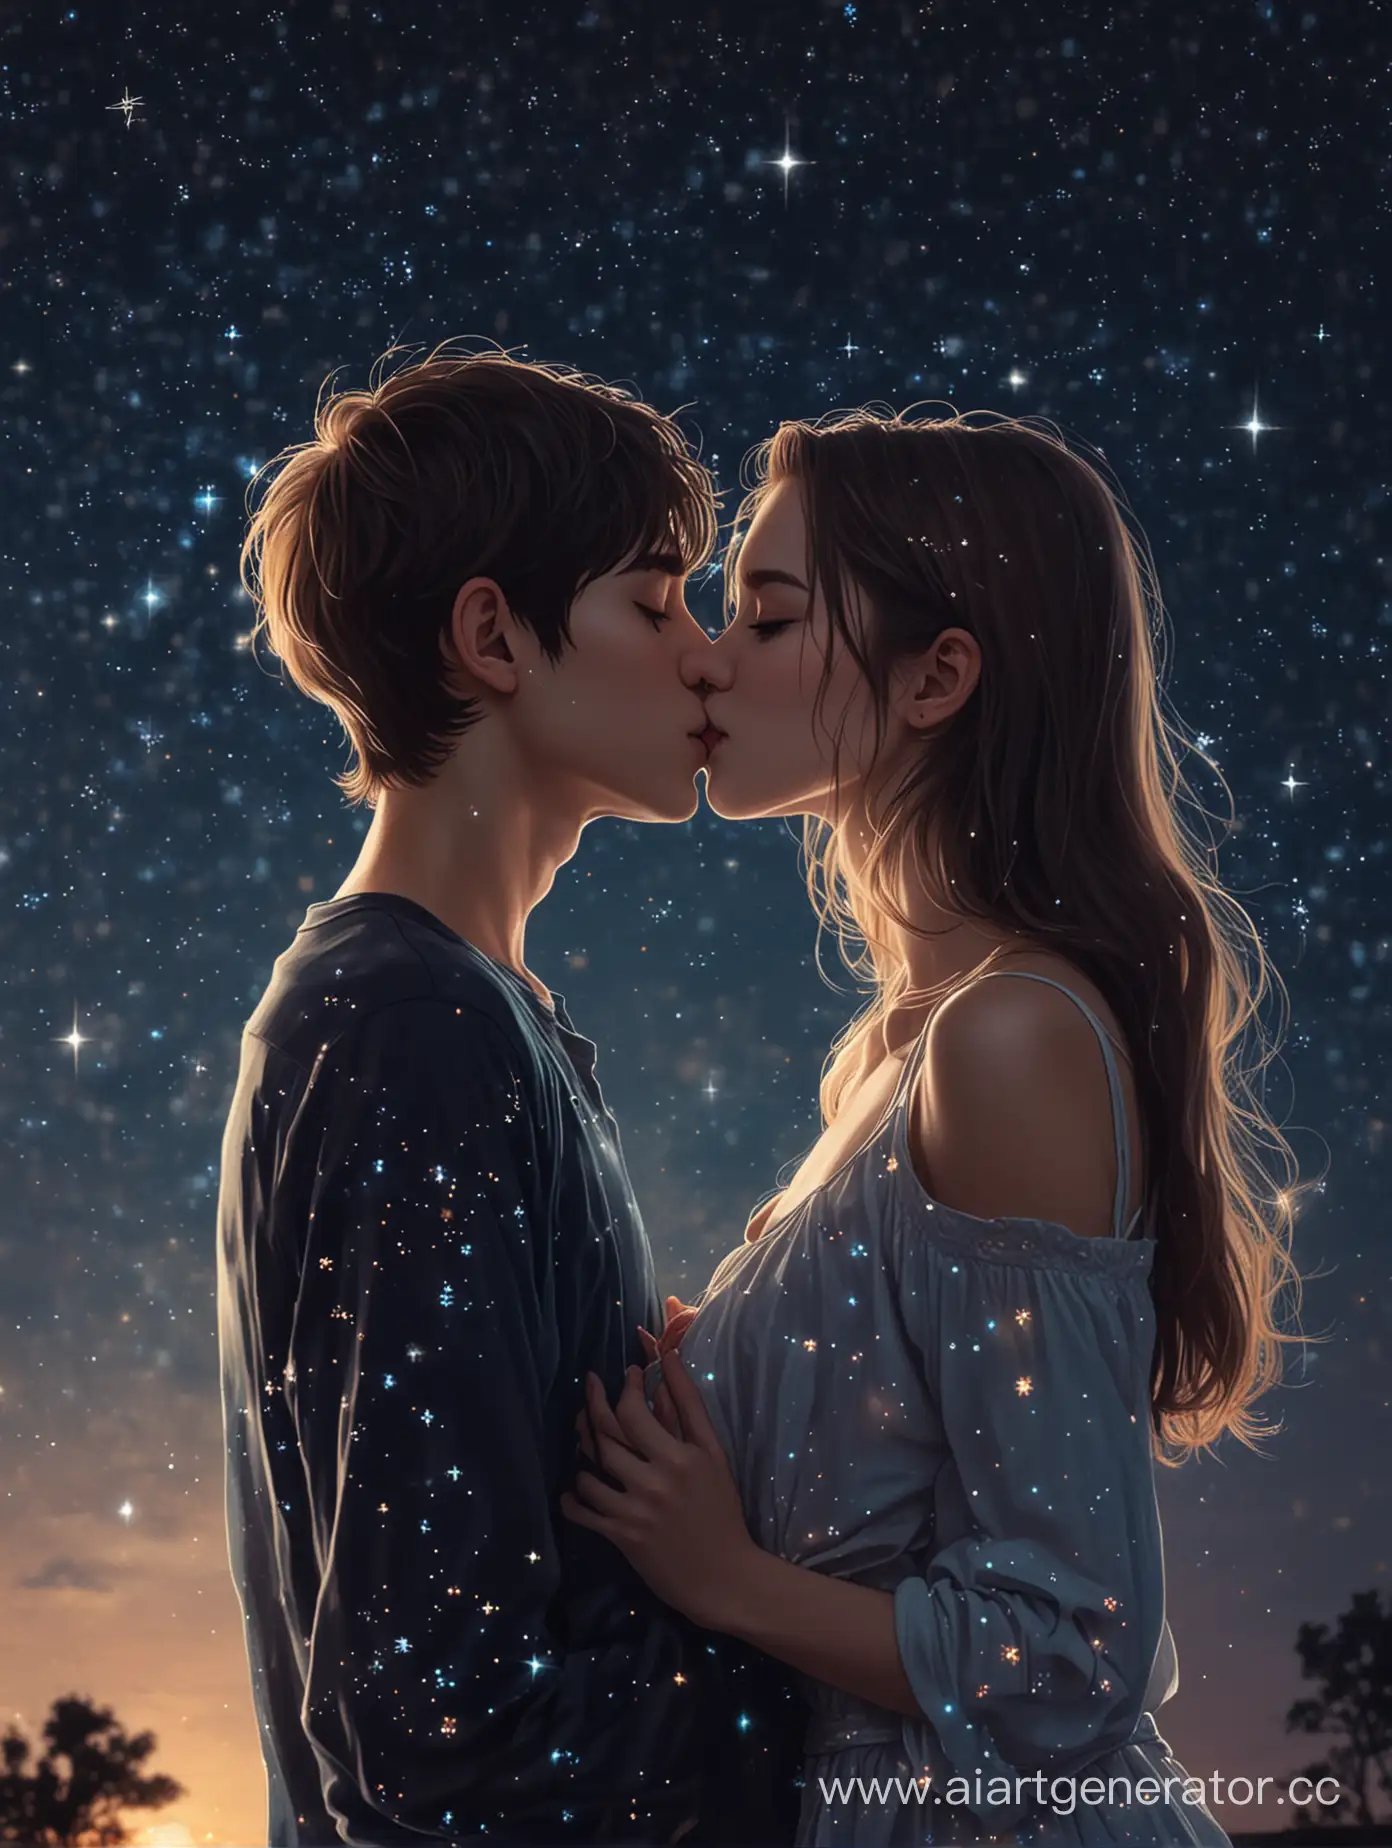 Starry-Night-Embrace-Young-Lovers-Tender-Moment